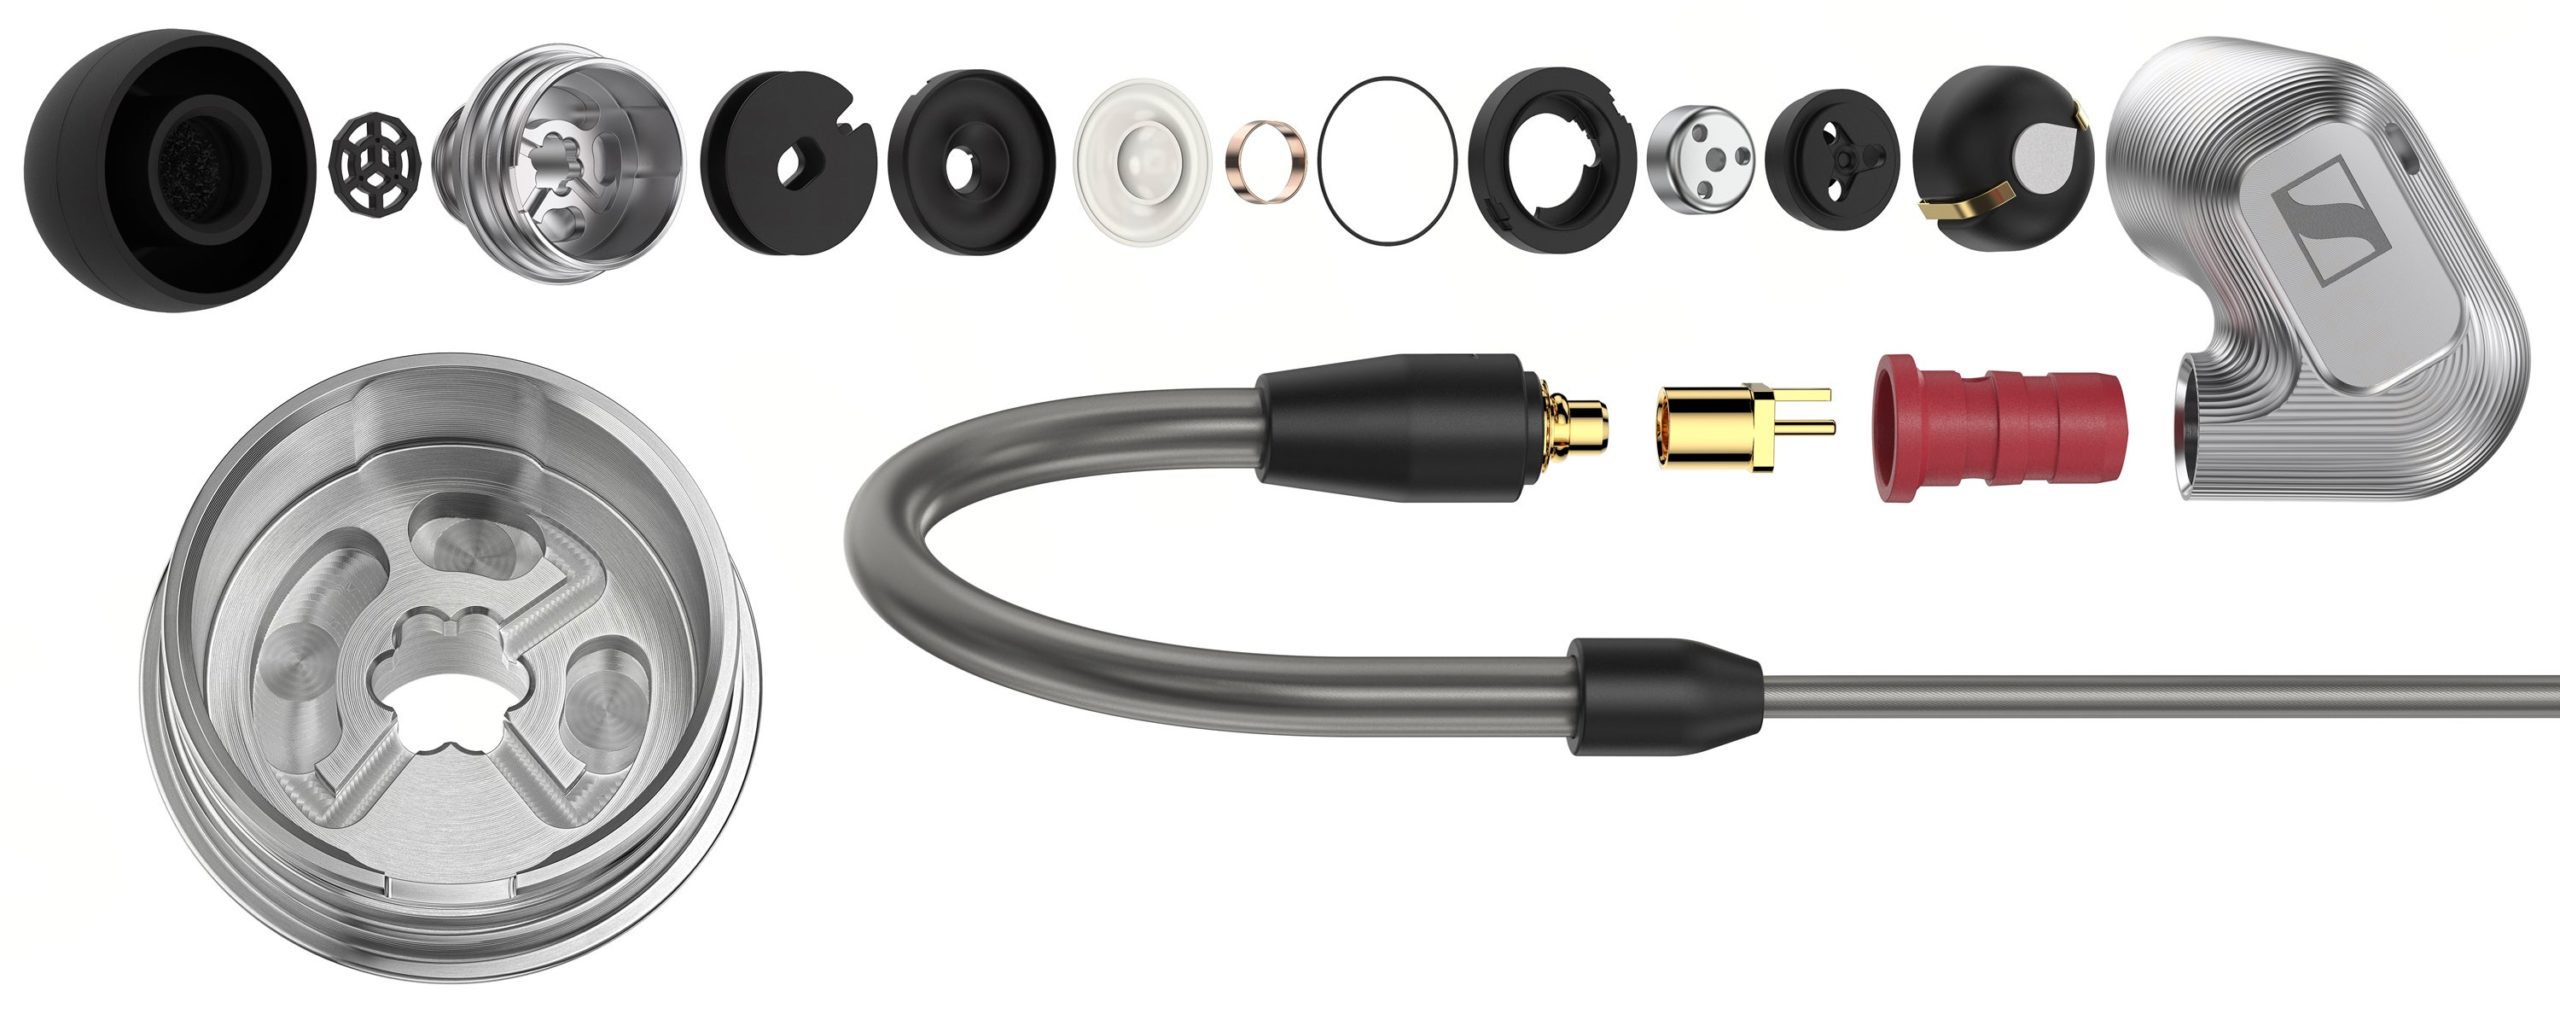 An exploded view of the dampening chambers inside the IE 900, as well as the components that make up the new driver Sennheiser developed for them. (Image: Sennheiser)